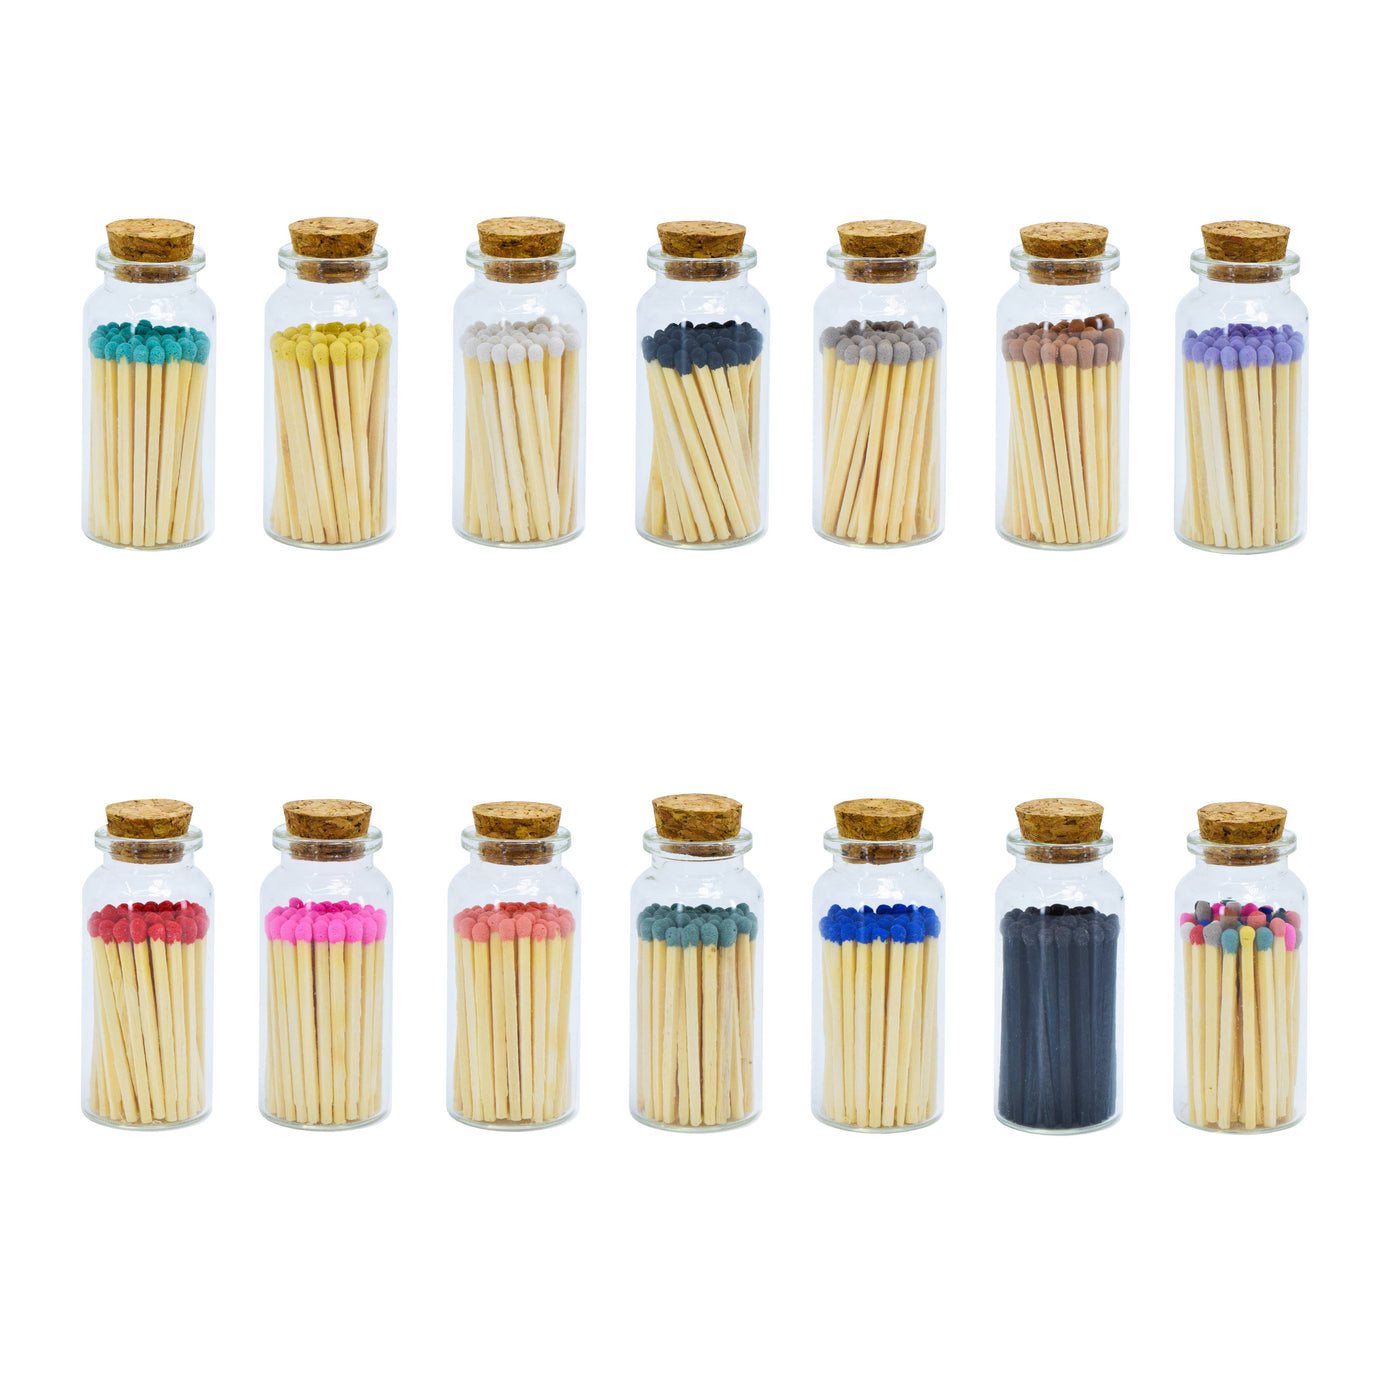 Small Match Bottles - Safety Matches in Jars with Striker: 40 Matchsticks Jar / Mixed Colors